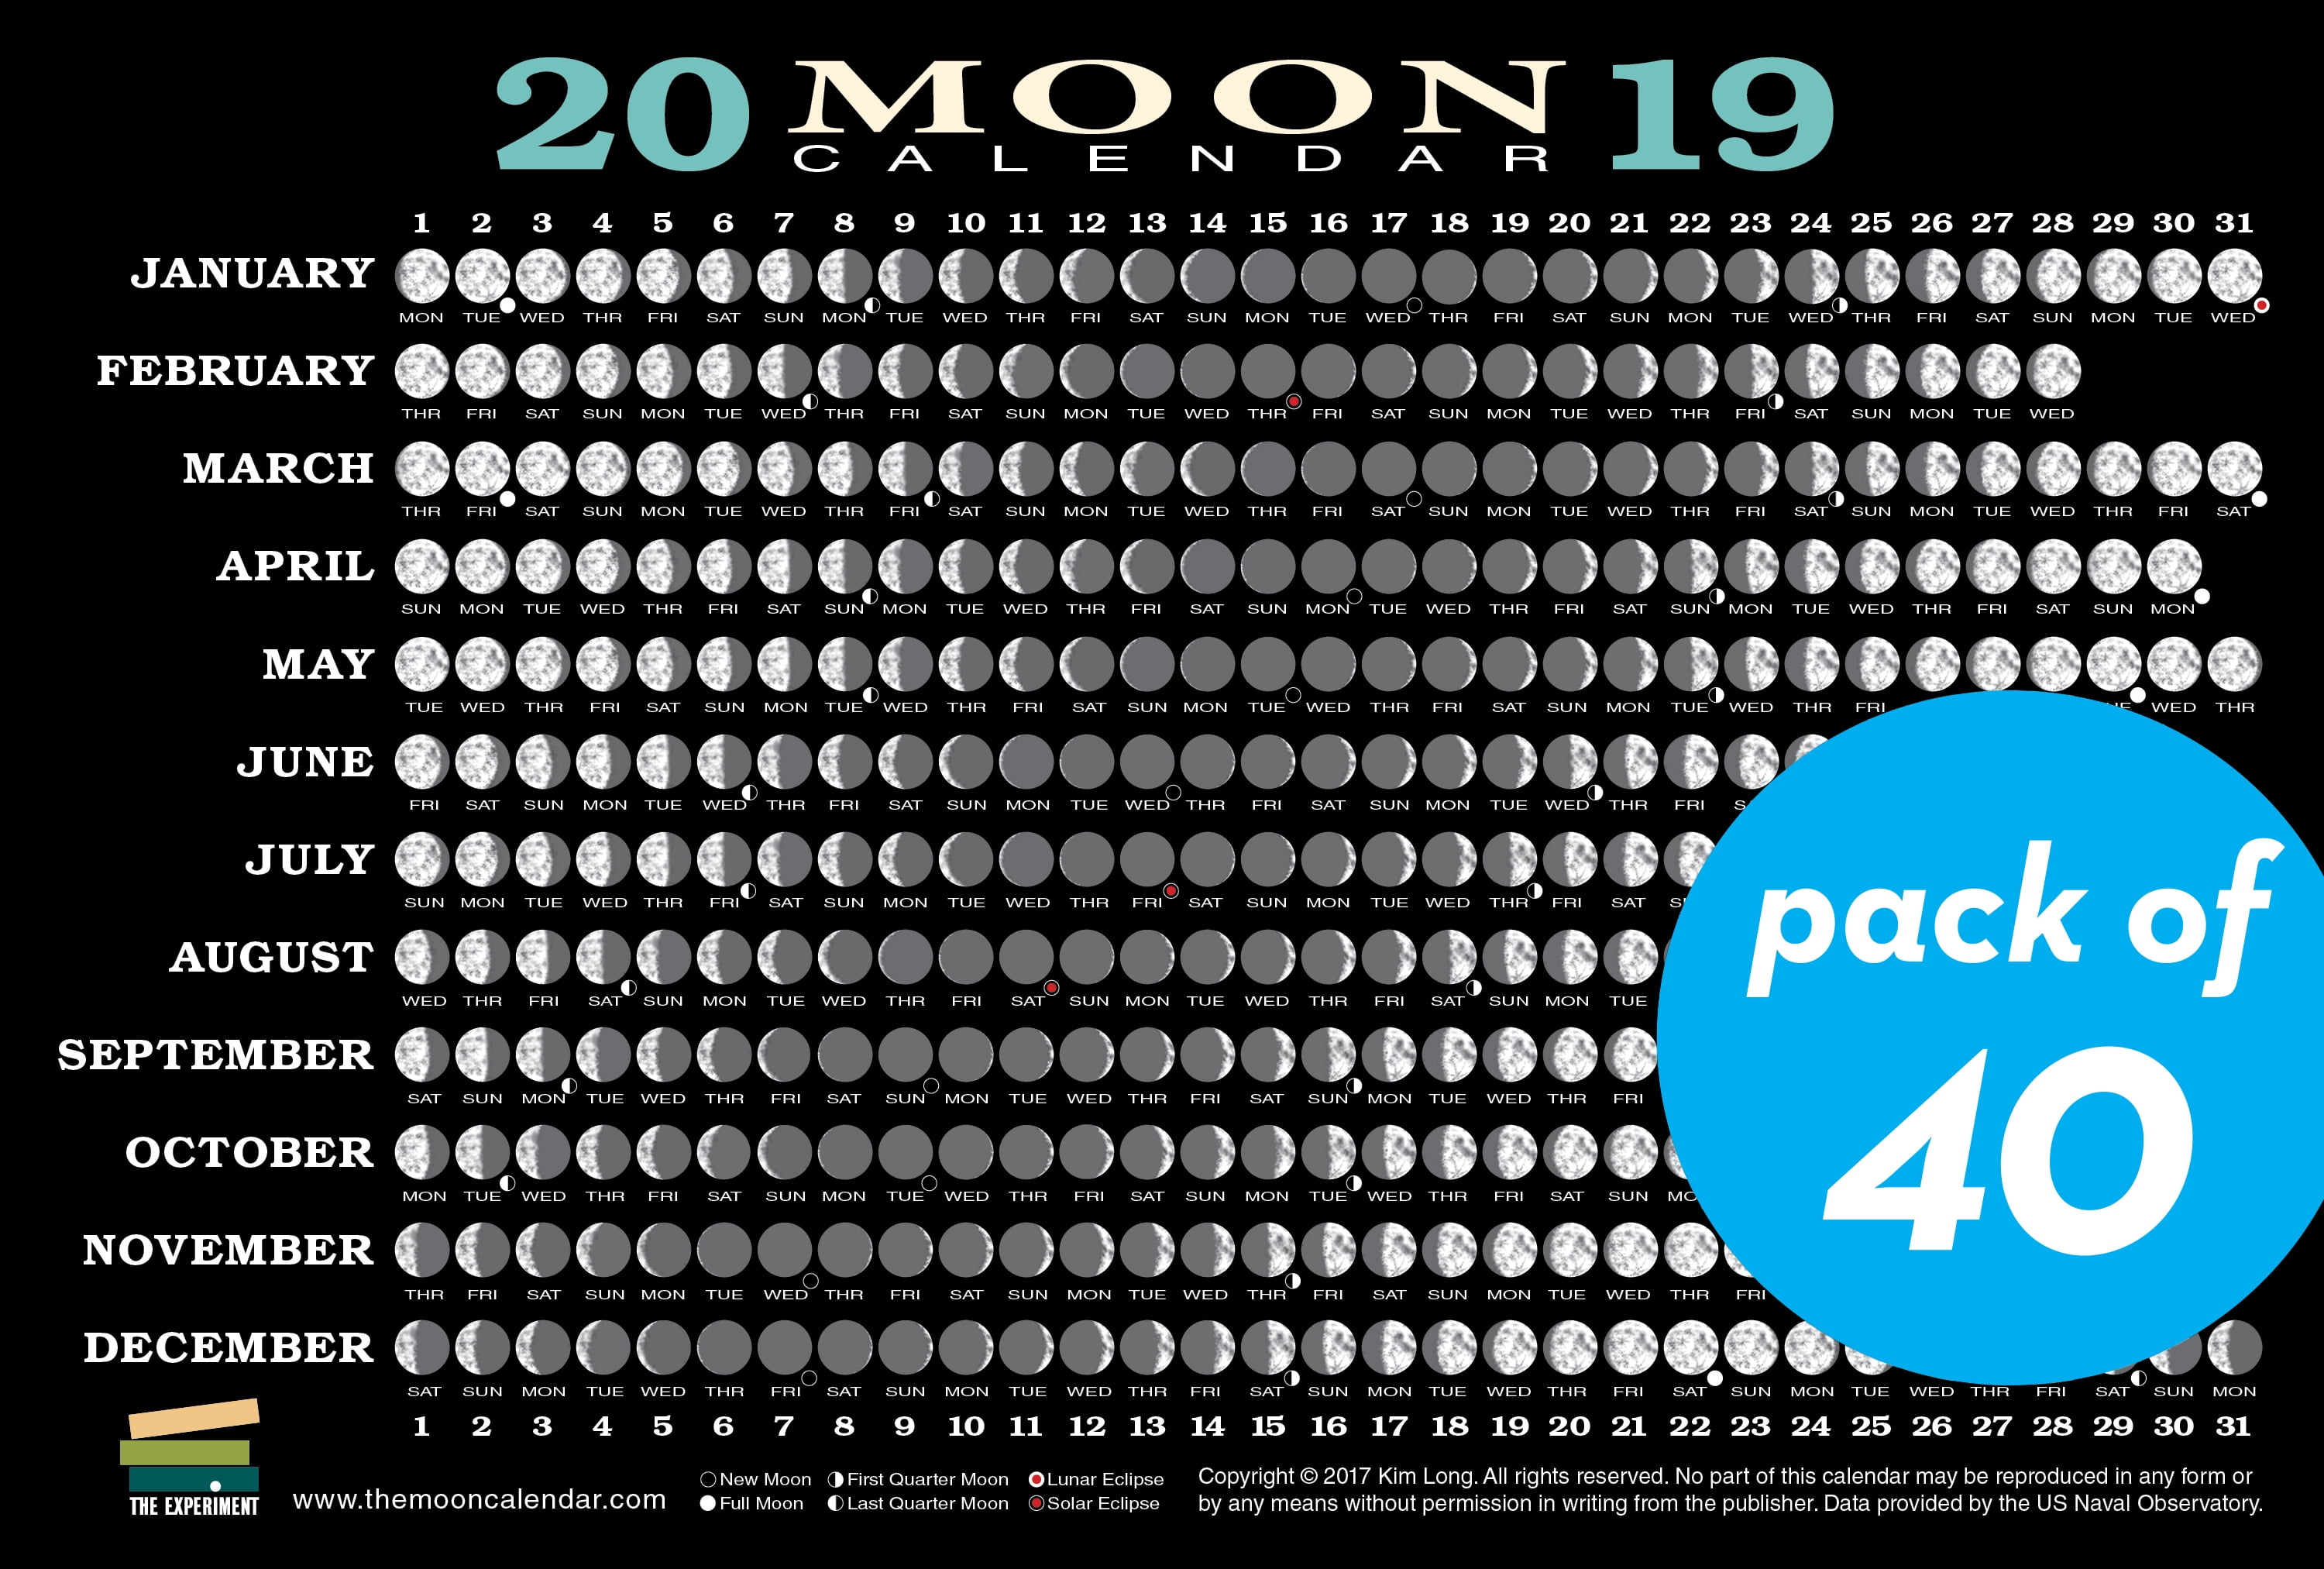 2019 Moon Calendar Card 40 Pack Lunar Phases Eclipses And More 